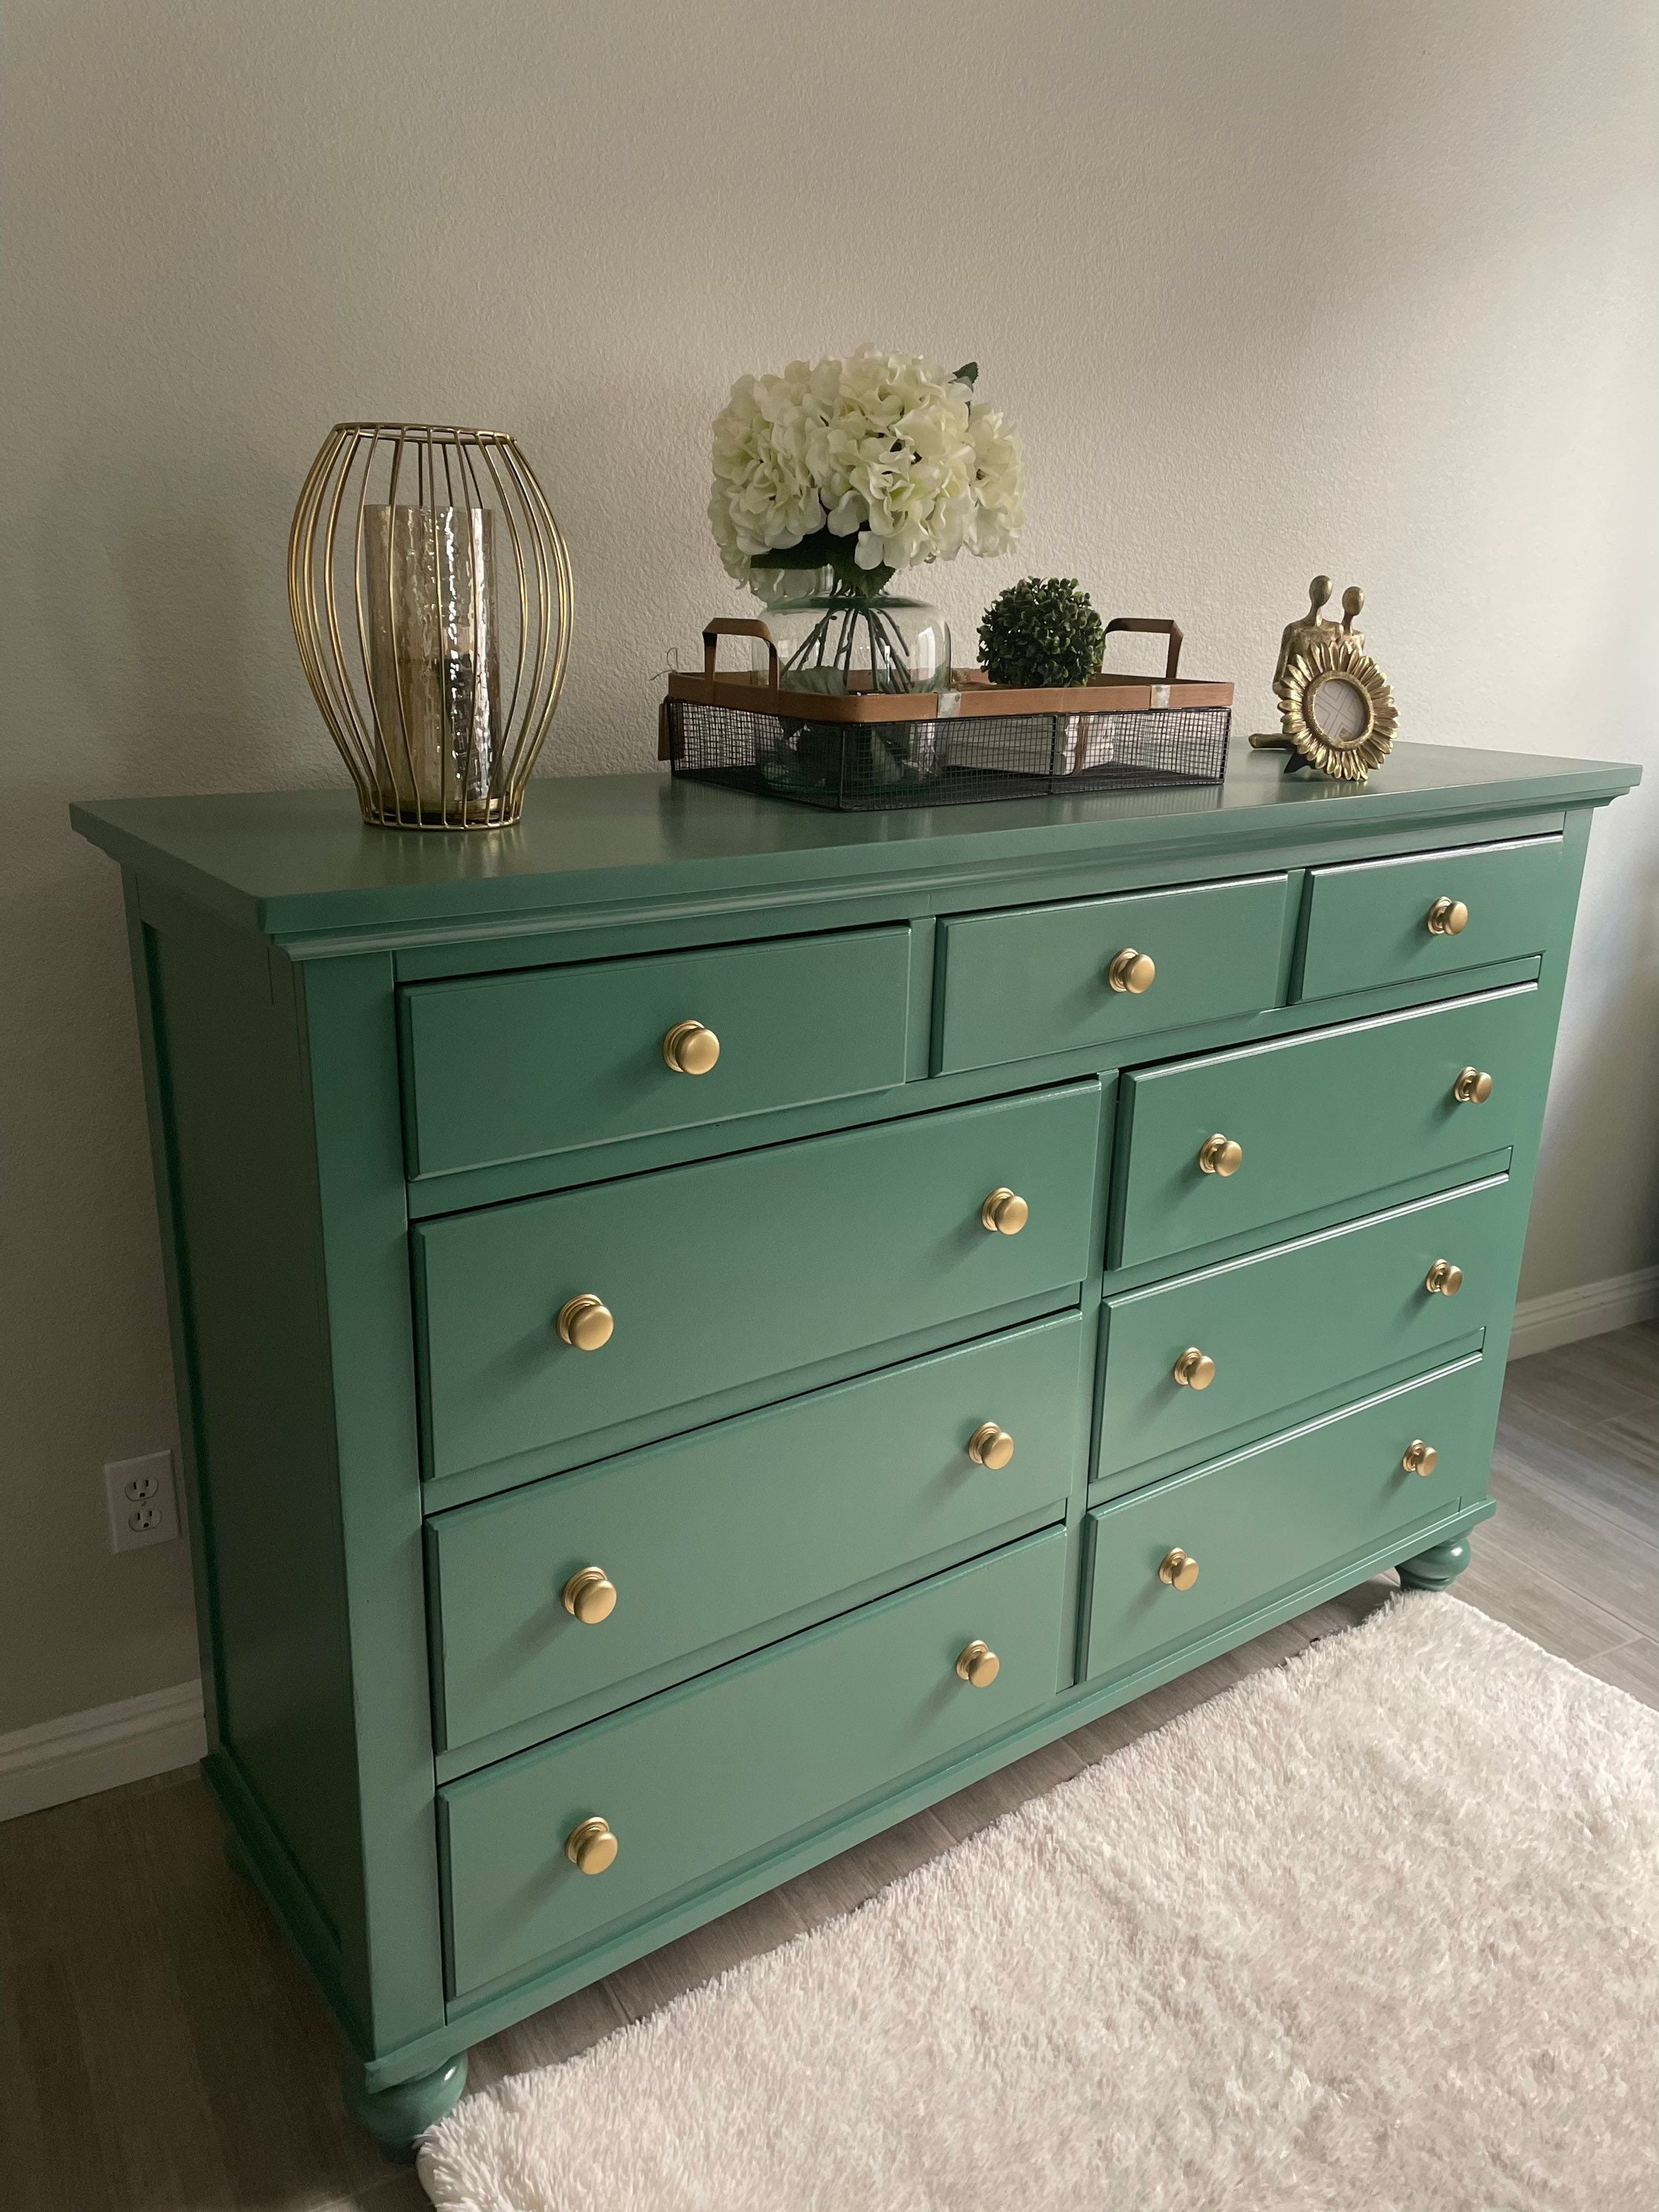 Soldgorgeous Tall Green Dresser/credenza/sideboard 